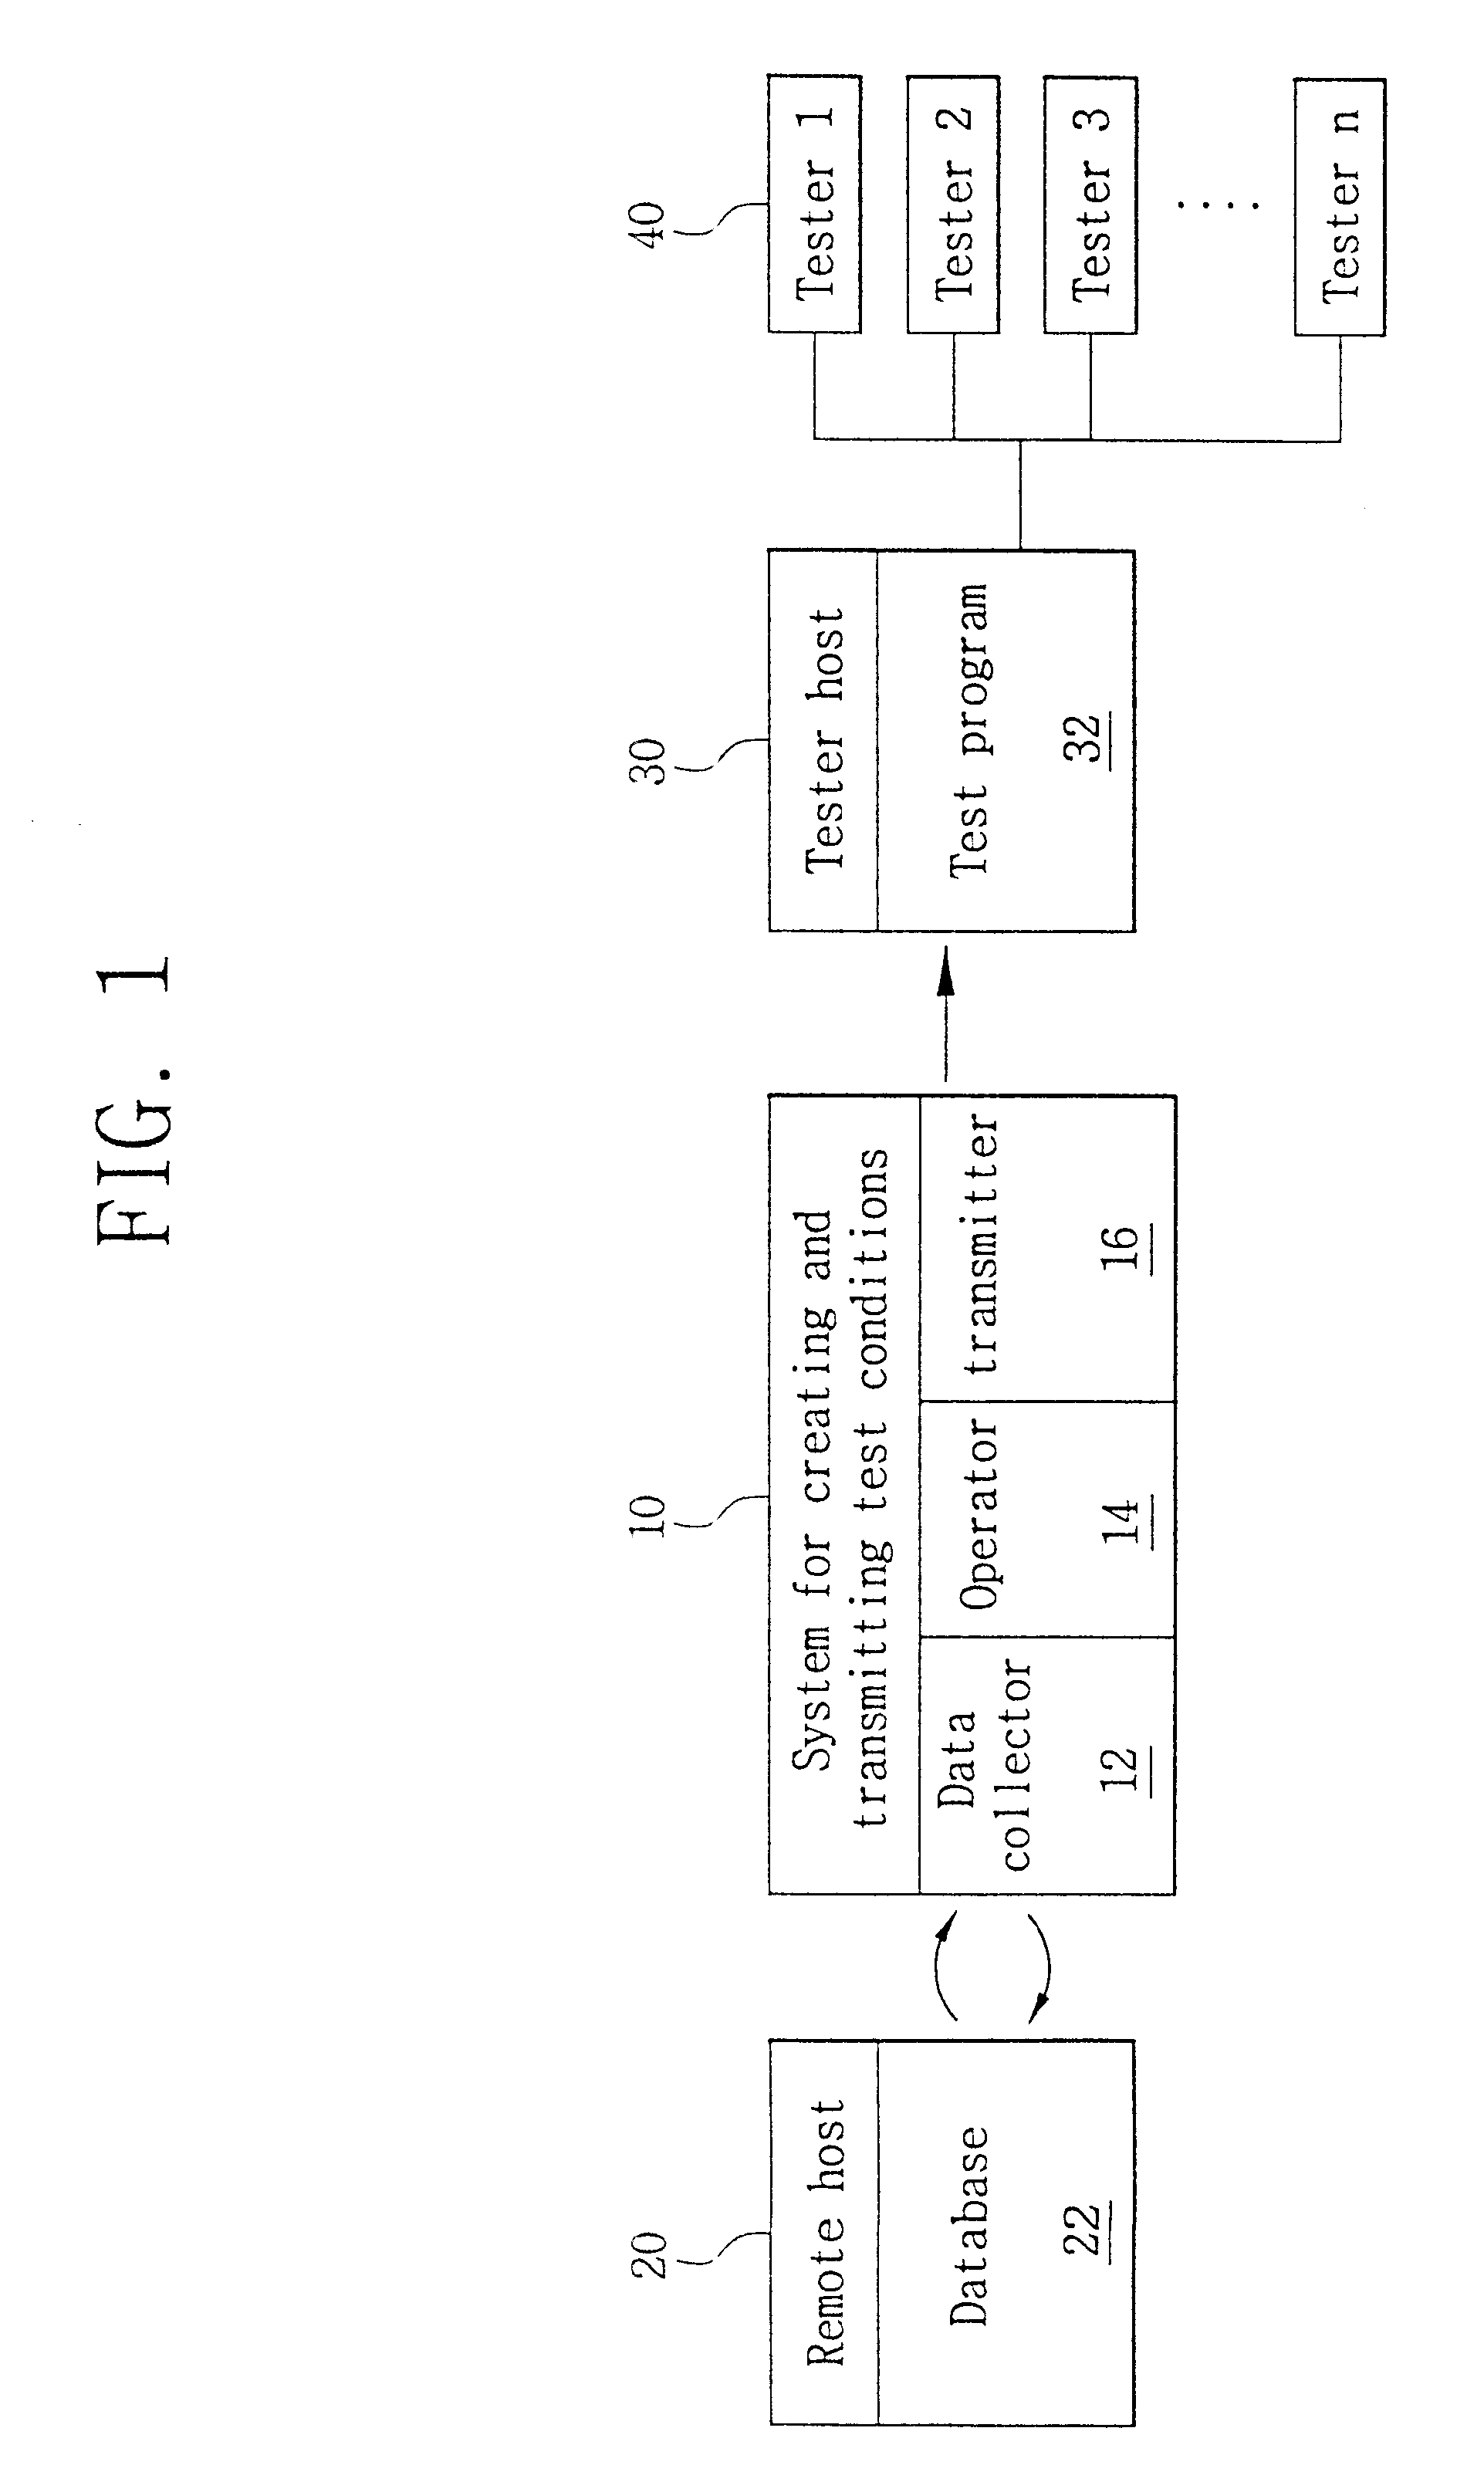 System and method for automatically creating and transmitting test conditions of integrated circuit devices